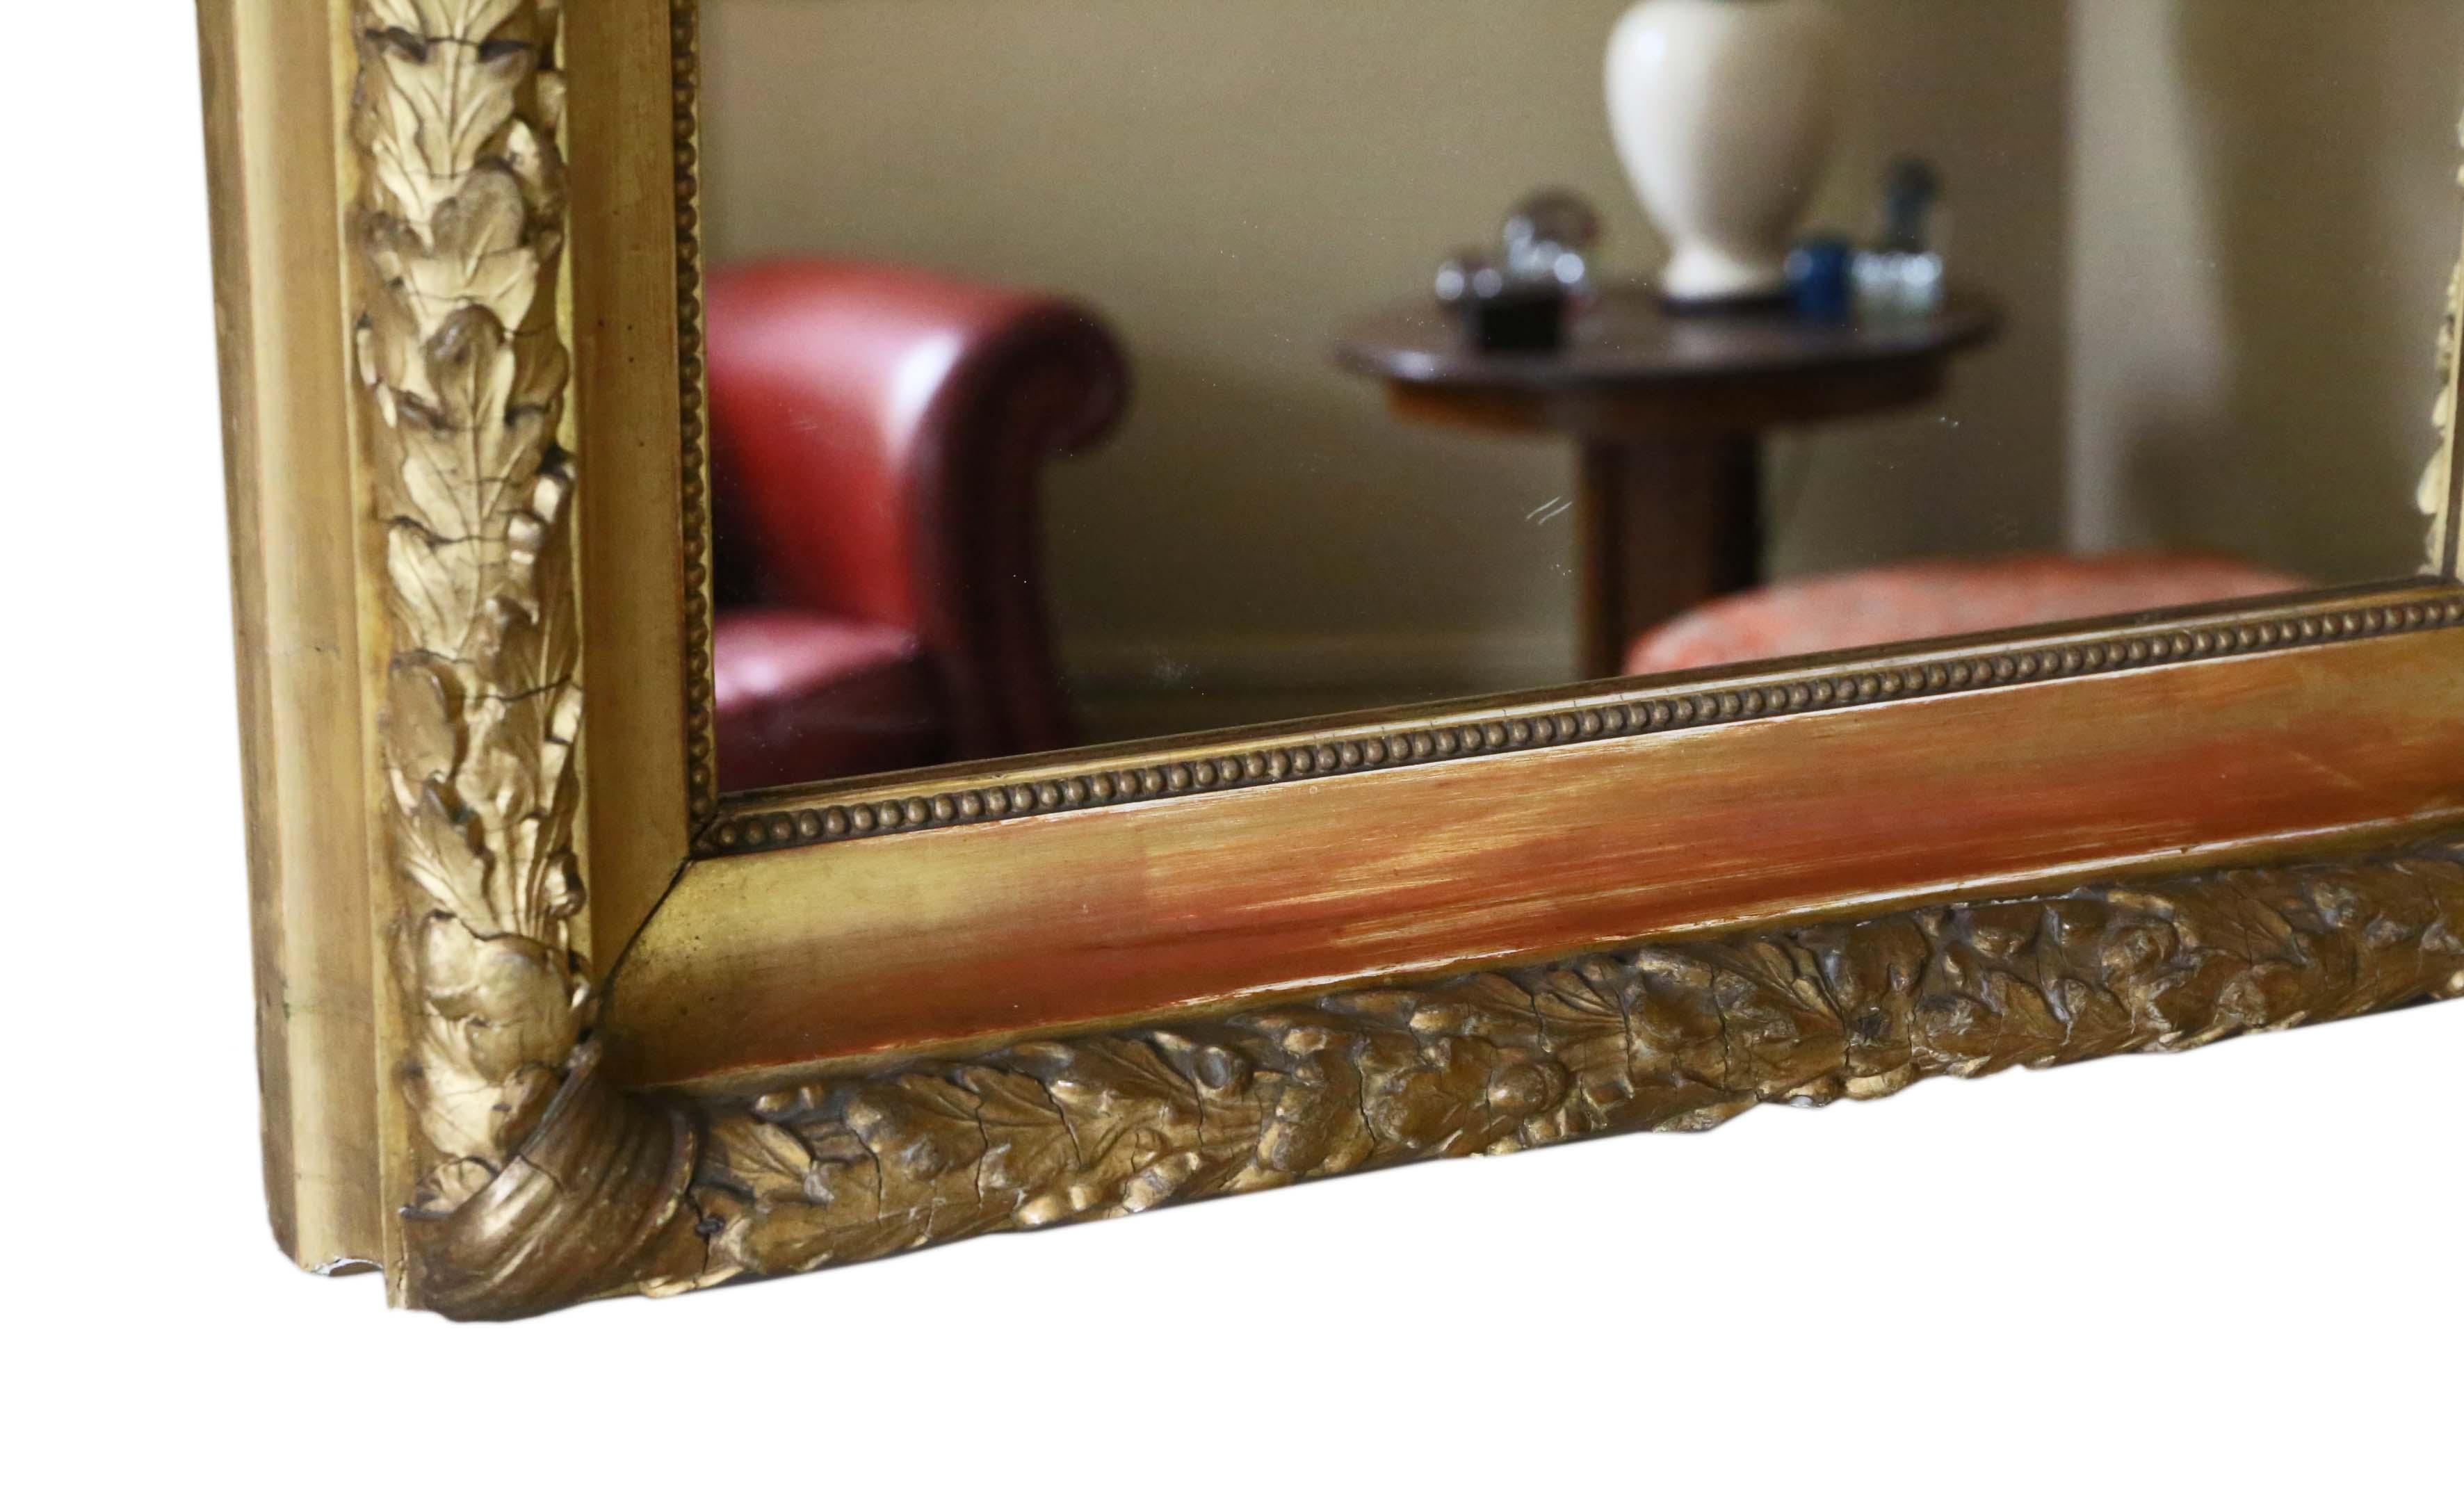 Pair of fine quality gilt overmantle or wall mirrors circa 1910. Lovely charm and elegance. Original finish.
These are lovely, rare mirrors. Great frames in very good condition… look great.
An impressive and rare find, that would look amazing in